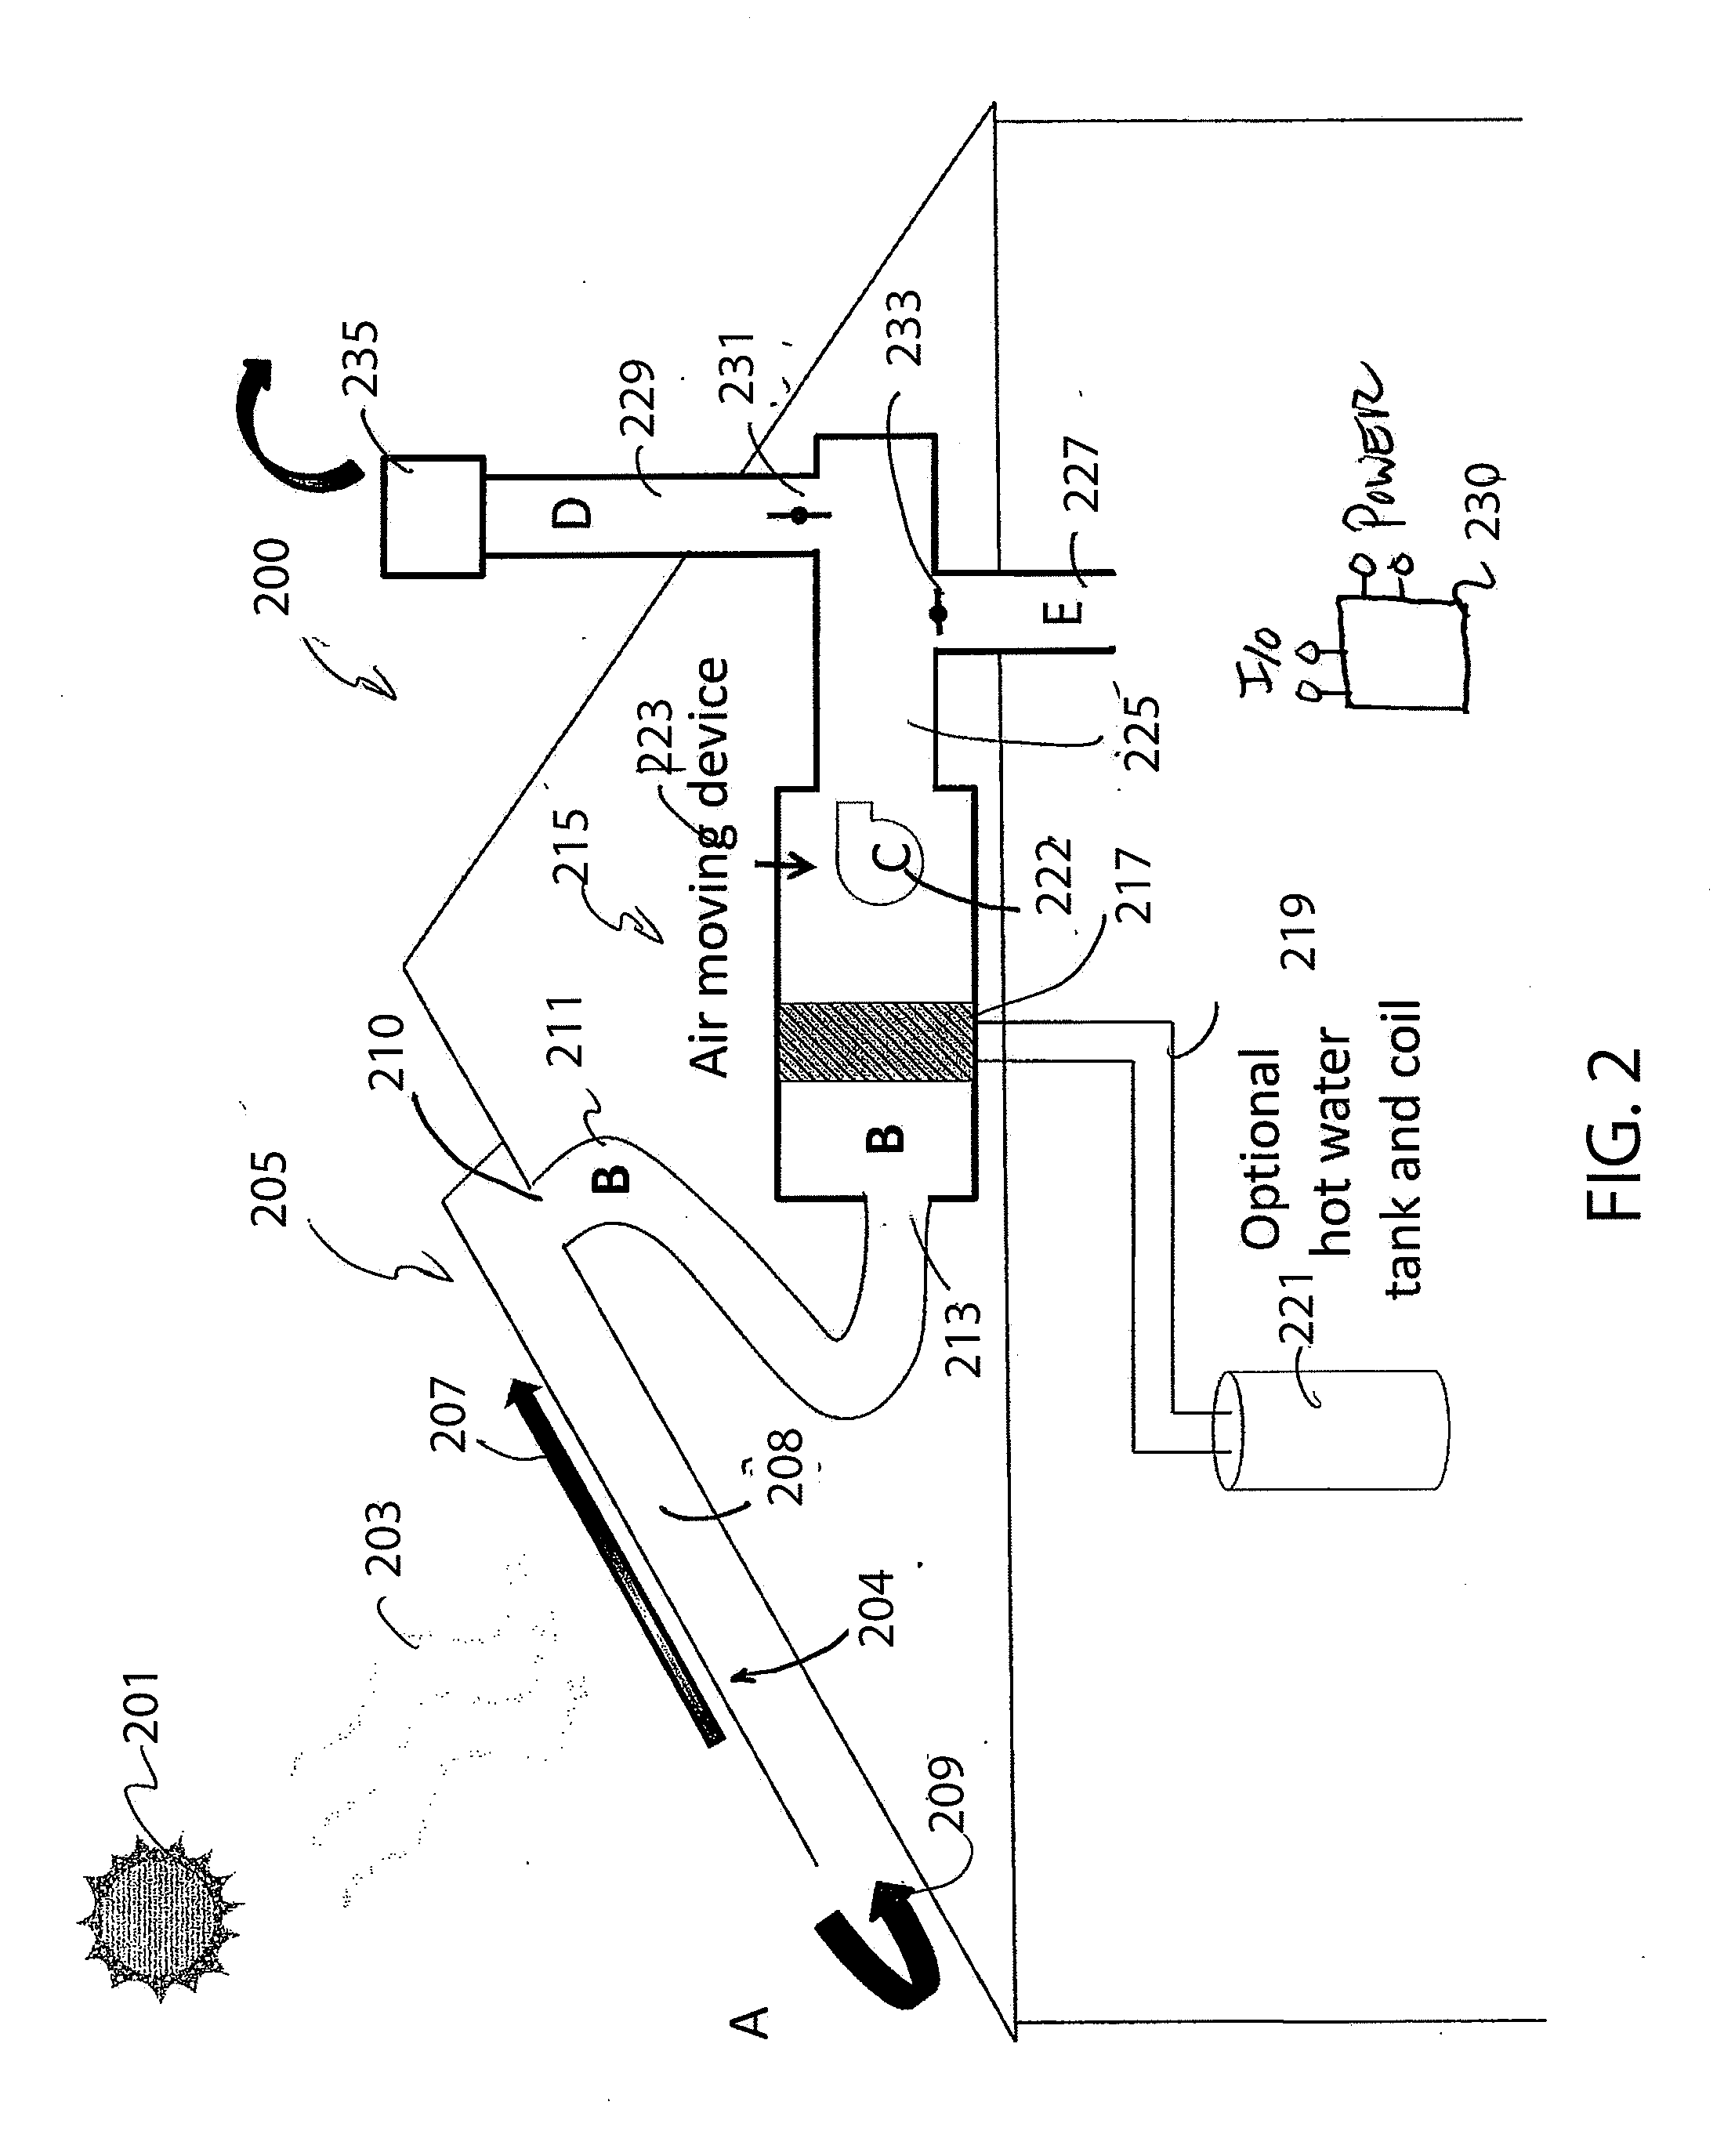 Method and device for monitoring operation of a solar thermal system